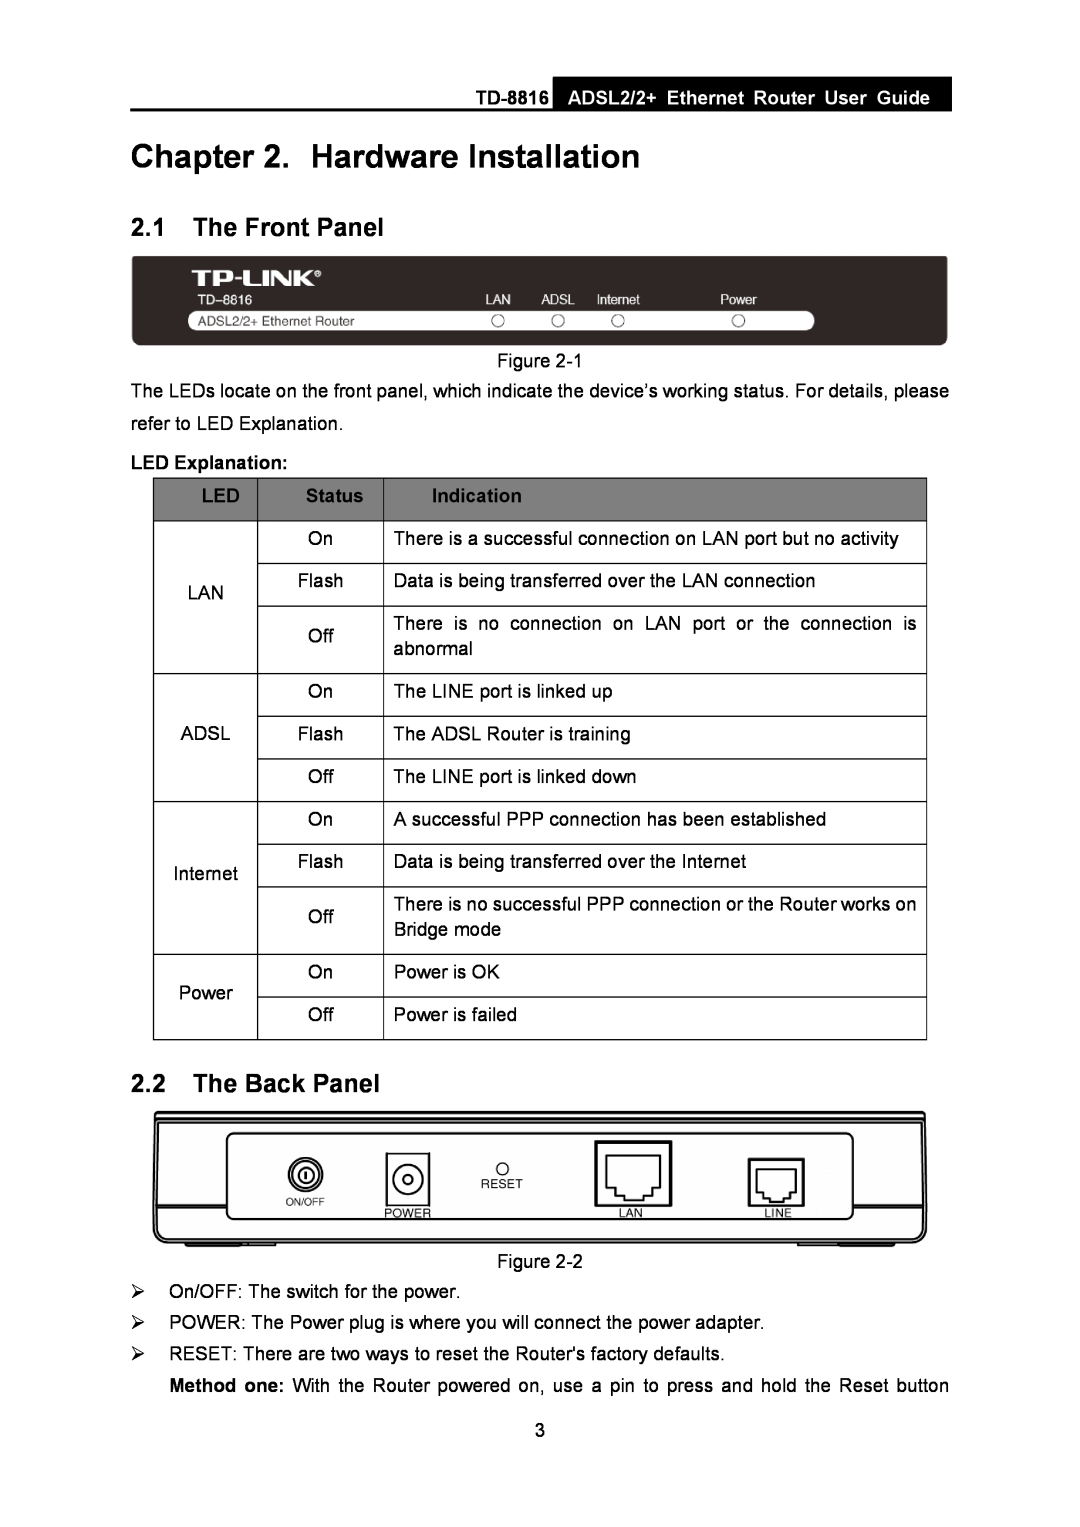 TP-Link TD-8816 manual Hardware Installation, The Front Panel, The Back Panel, ADSL2/2+ Ethernet Router User Guide, Status 